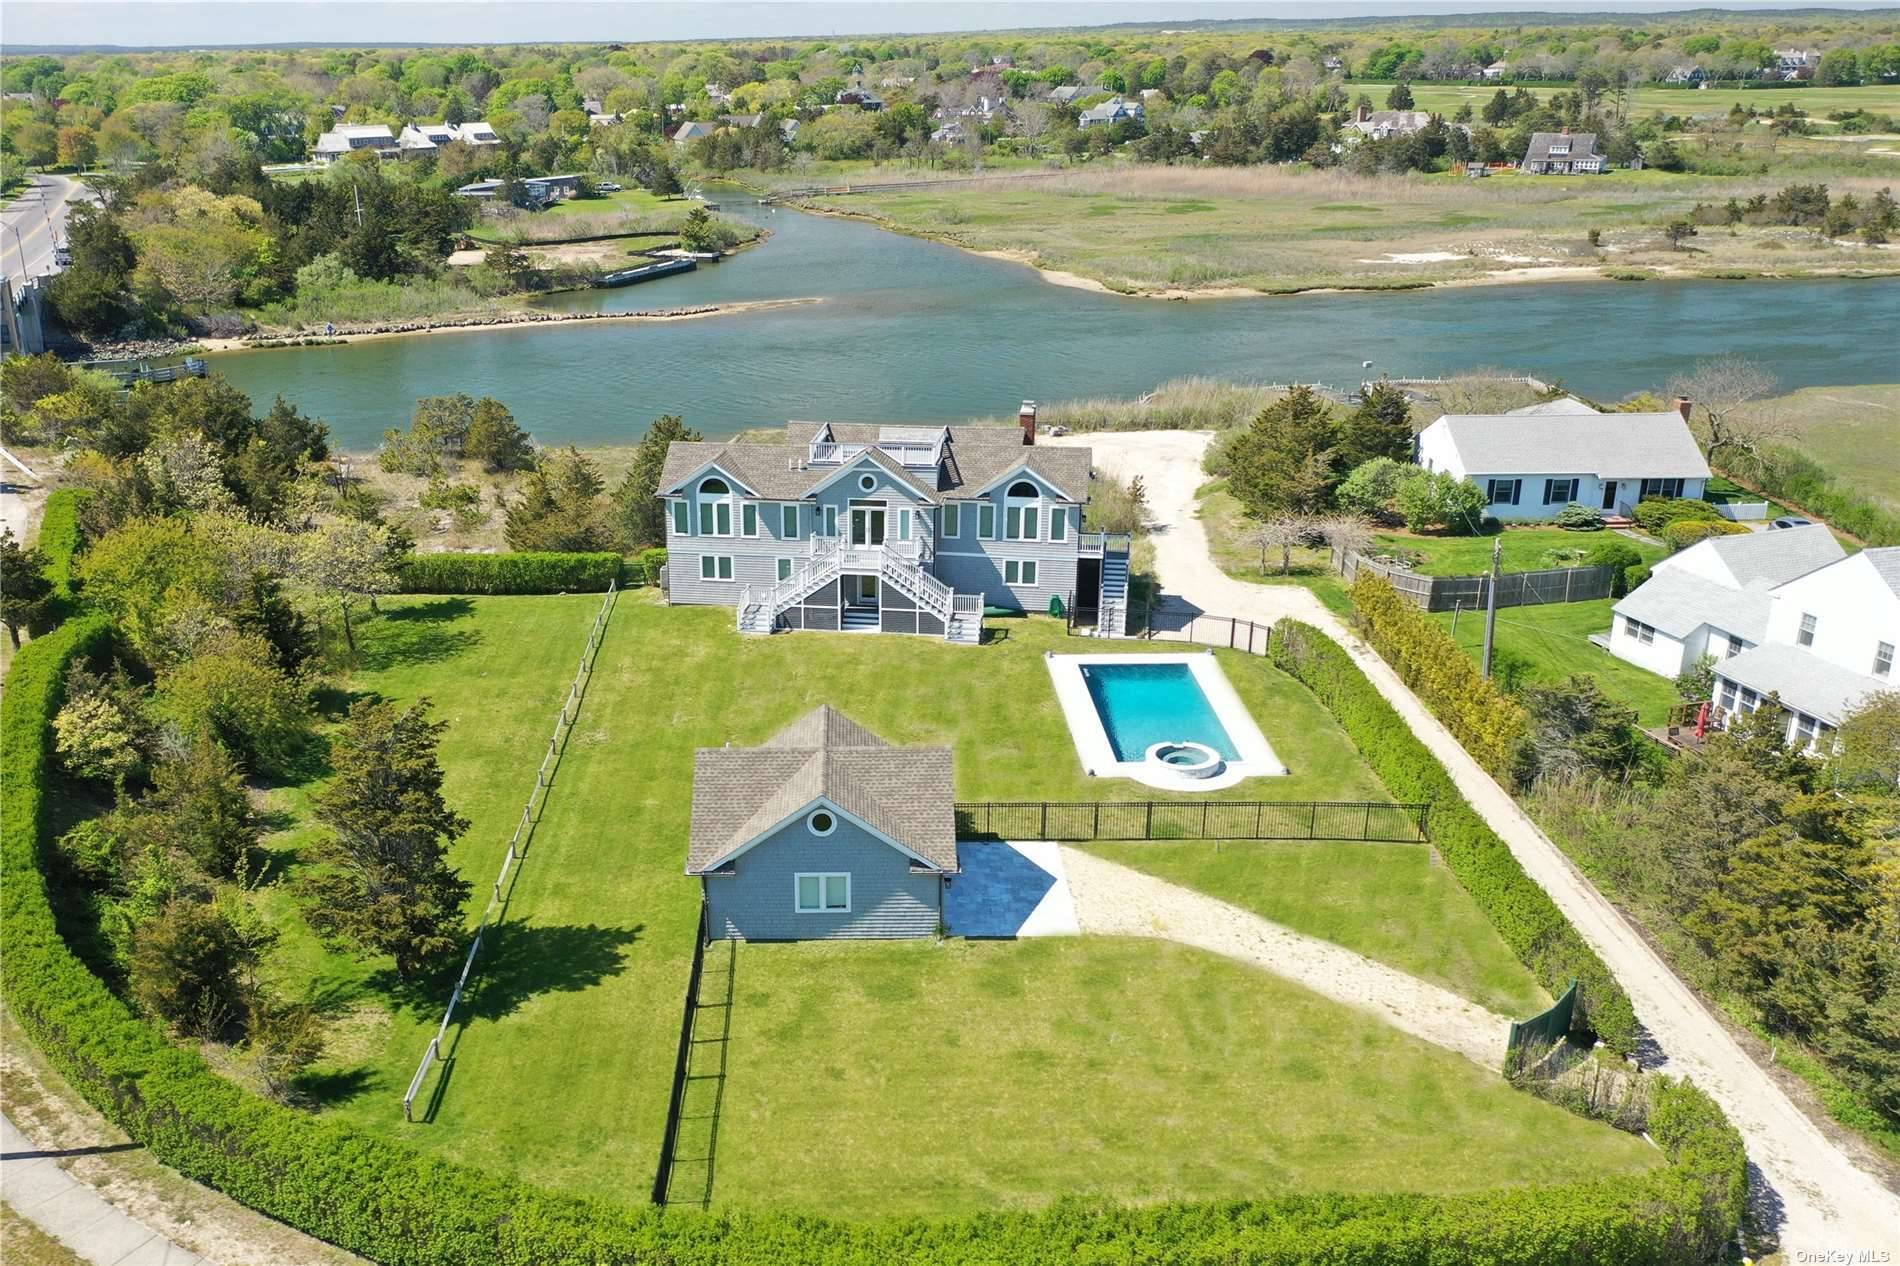 Views abound ! This stunning Quogue waterfront home, situated on an estate like full acre with 123 feet of waterfront, was meticulously reconstructed in 2017 to maximize views from indoors ...